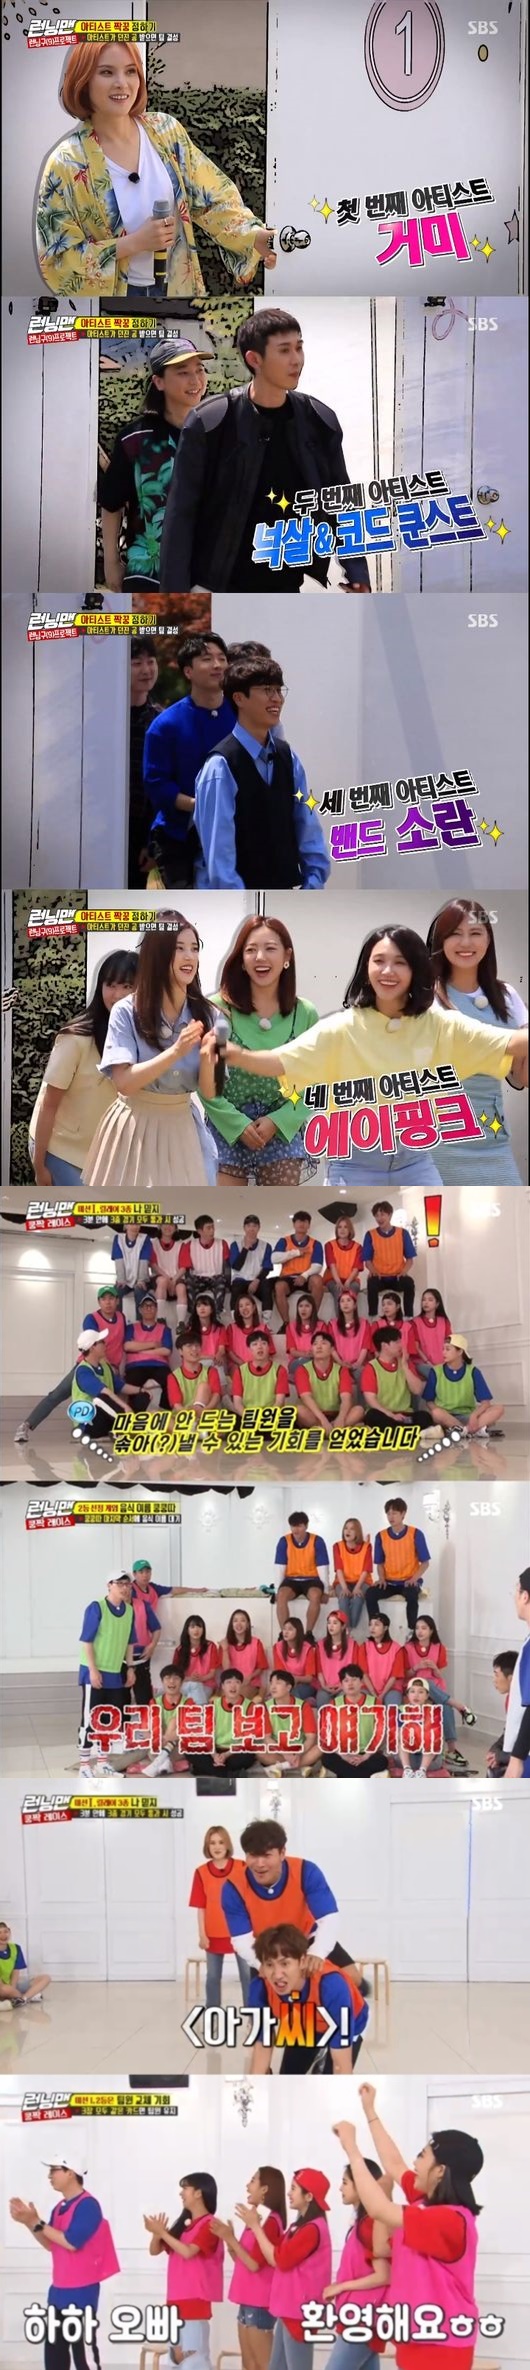 SBS Running Man unveiled the Collaboration The Artists to hold a 9th anniversary fan meeting.According to Nielsen Korea, the ratings agency Running Man, which aired on the 7th, soared to 8.7% of the highest audience rating per minute, and the 2049 target audience rating, an important indicator of major advertising officials, ranked first in the same time zone with 4% (based on the second part of the audience rating of Seoul Capital Area households).The average audience rating was 4.9% in the first part and 6.7% in the second part (based on the audience rating of the Seoul Capital Area household).The broadcast was made up of the Running Zone Project, and the top four artists who will hold a 9th anniversary Korean fan meeting with the members were unveiled.The Artist 1 team and two members had to be paired, and the OST Queen spider first appeared, paired with Kim Jong-kook and Lee Kwang-soo.Nunsal & Cod Kunst was in close contact with Song Ji-hyo X Haha, and the band disturbance was paired with Yoo Jae-Suk X Jeon So-min and girl group Apink with Ji Suk-jin X Yang Se-chan.In particular, Nucksal and Song Ji-hyo made a bigger smile as they became a hot topic with resemblance.With the first pair set, it was decorated with a kung-kak race that takes place in a total of three rounds.The final team was able to stand on stage as a collaboration team, and all teams played a confrontation without concessions.In the first showdown, the spider X Kim Jong-kook X Lee Kwang-soo team took first place and did not change the team member, but the second-ranked Apink X Ji Suk-jin X Yang Se-chan team did not agree.Eventually, Yoo Jae-Suk X Haha was paired with Apink, and the scene was the best one minute with a highest audience rating of 8.7%.Next weeks broadcast will reveal the final results of the Colabo Race.